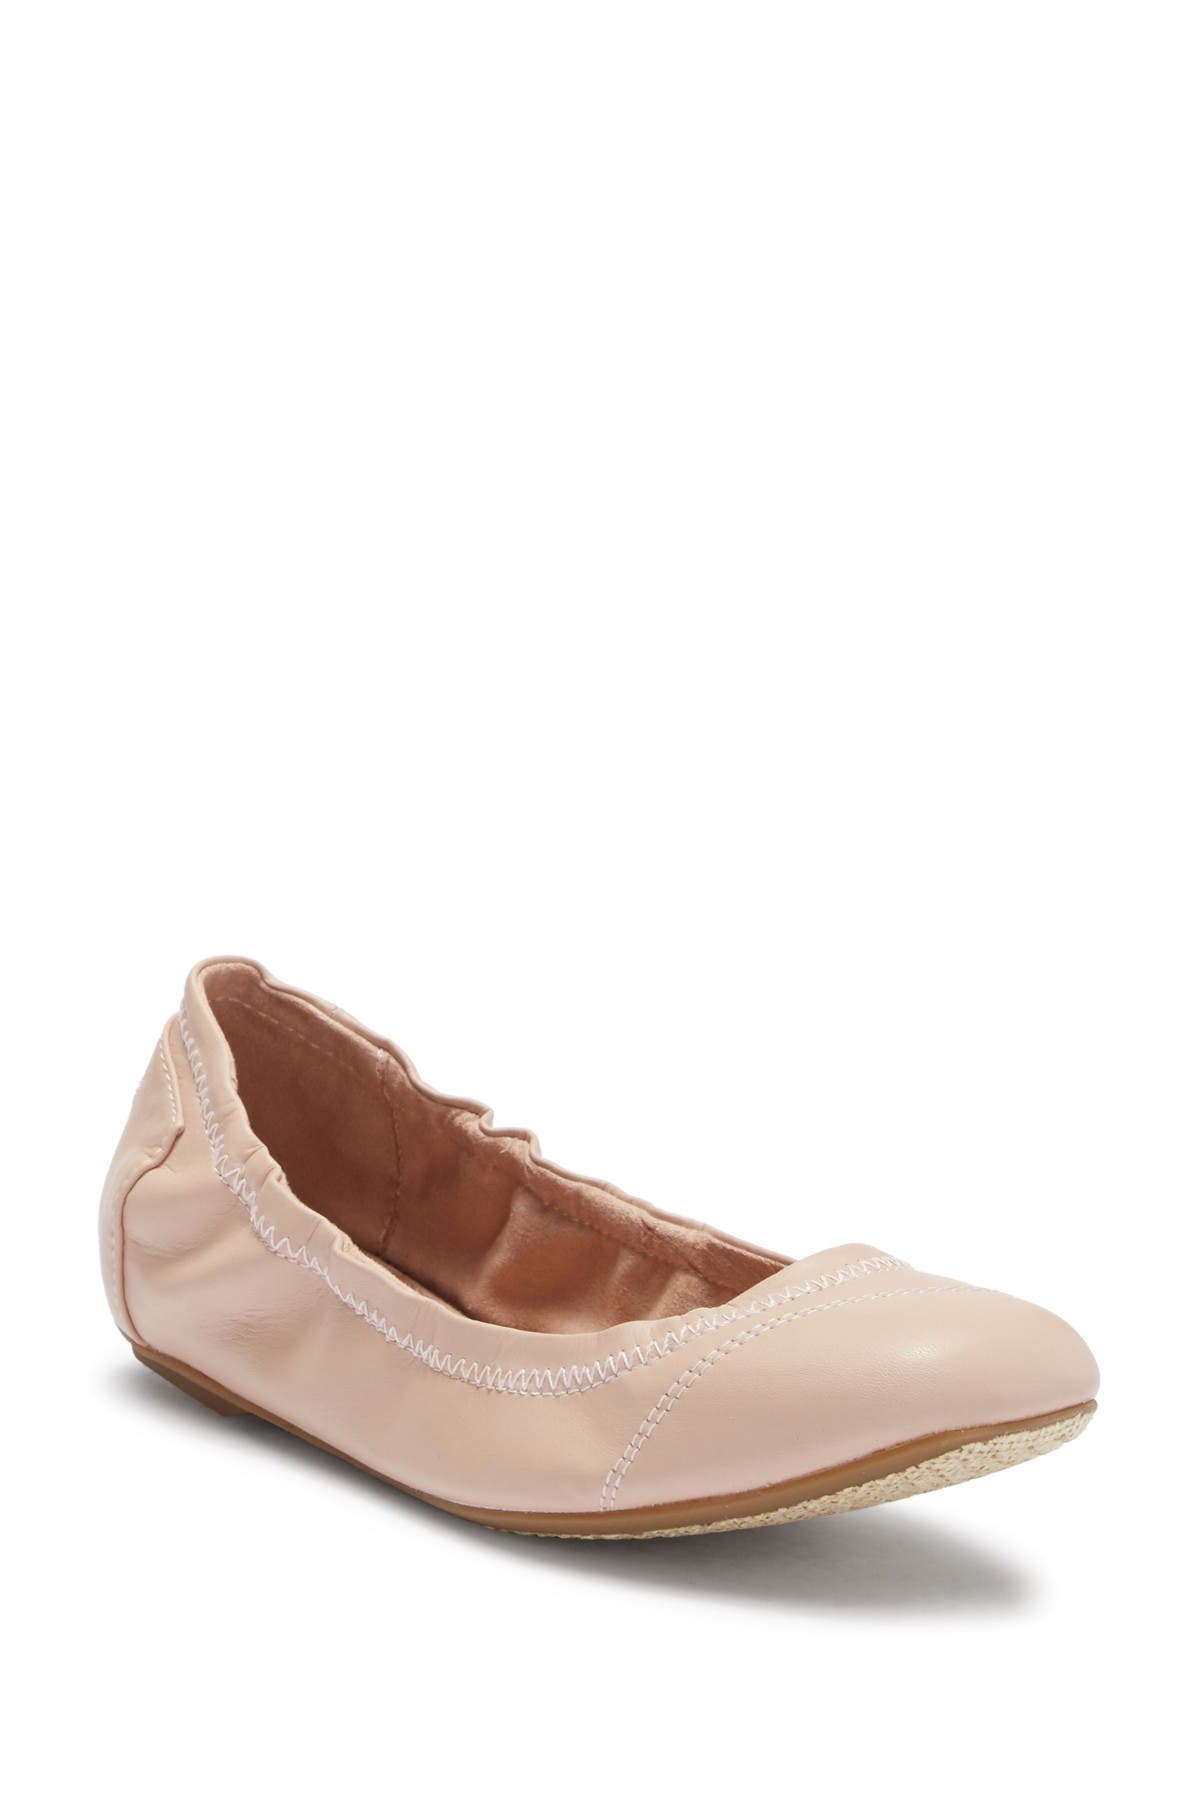 toms leather ballet flats